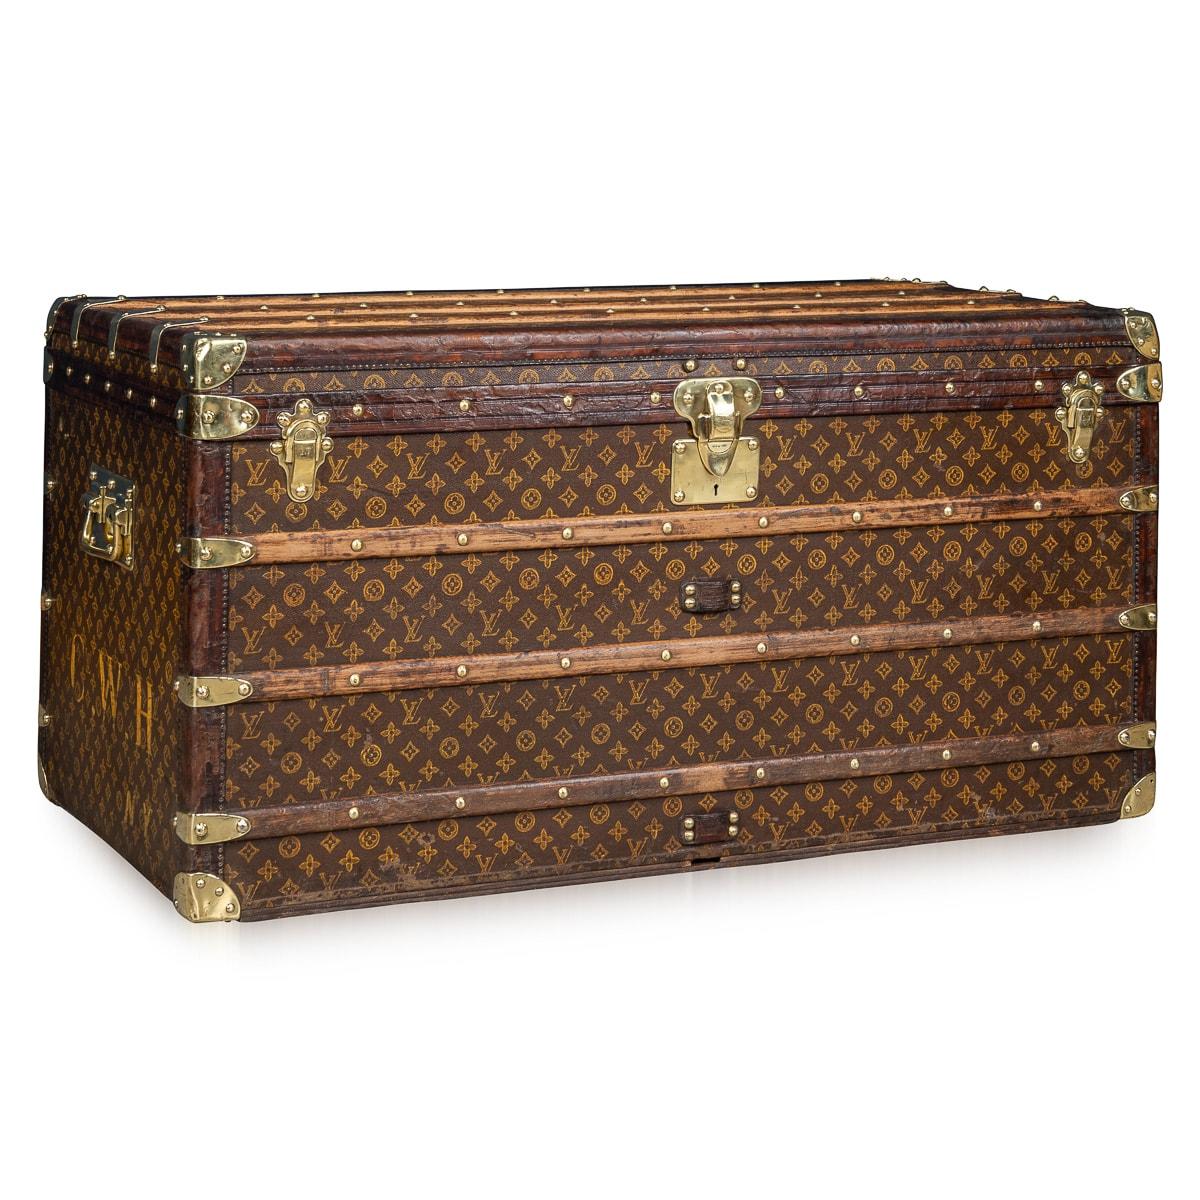 An exquisite and complete Louis Vuitton trunk from the early part of the 20th century. An absolutely essential item for elite travellers of its time the trunk is adorned in the iconic LV monogrammed canvas, accented by lozine trim and brass